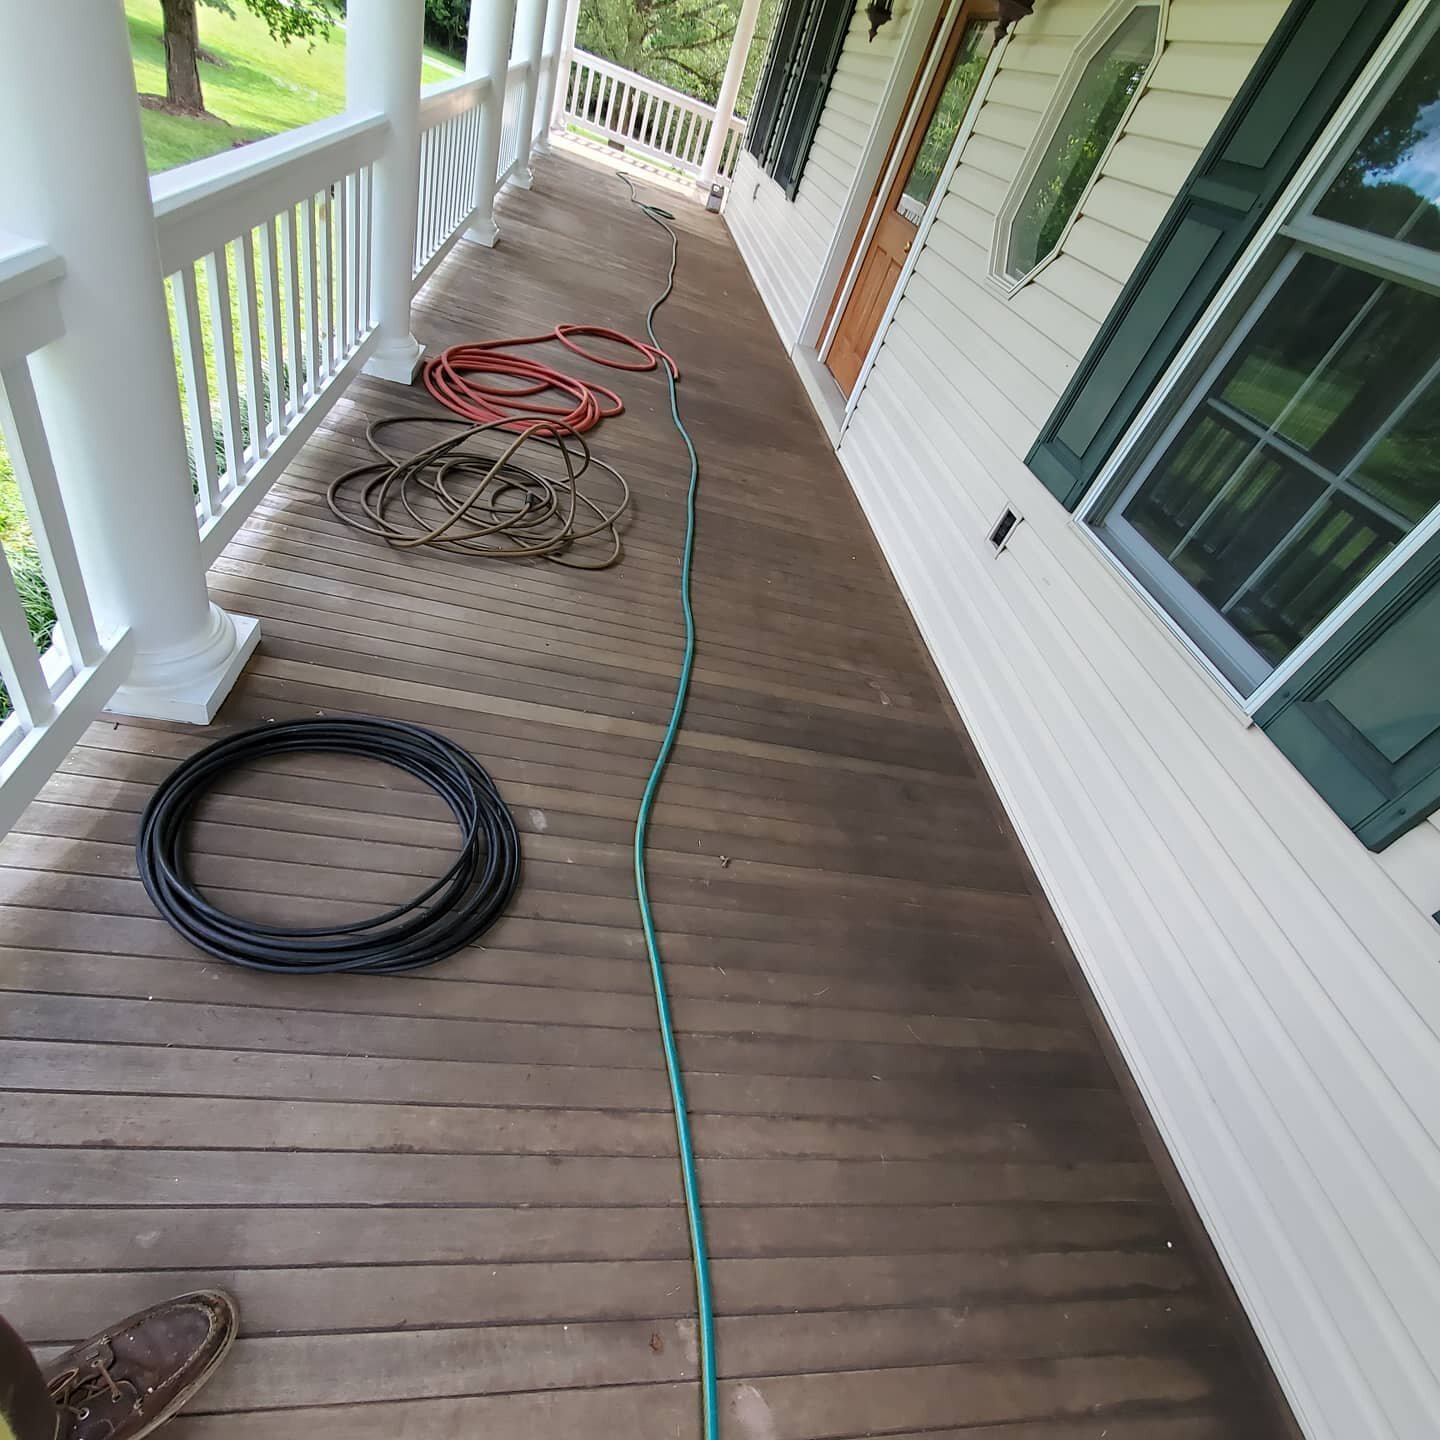 The Deck Dudes Stain Ipe T&amp;G porch floor with Penofin
#&quot;Don't Forget to Wipe&quot;
#Penofin  #ipe
#TheDeckDudes  #stainingwood